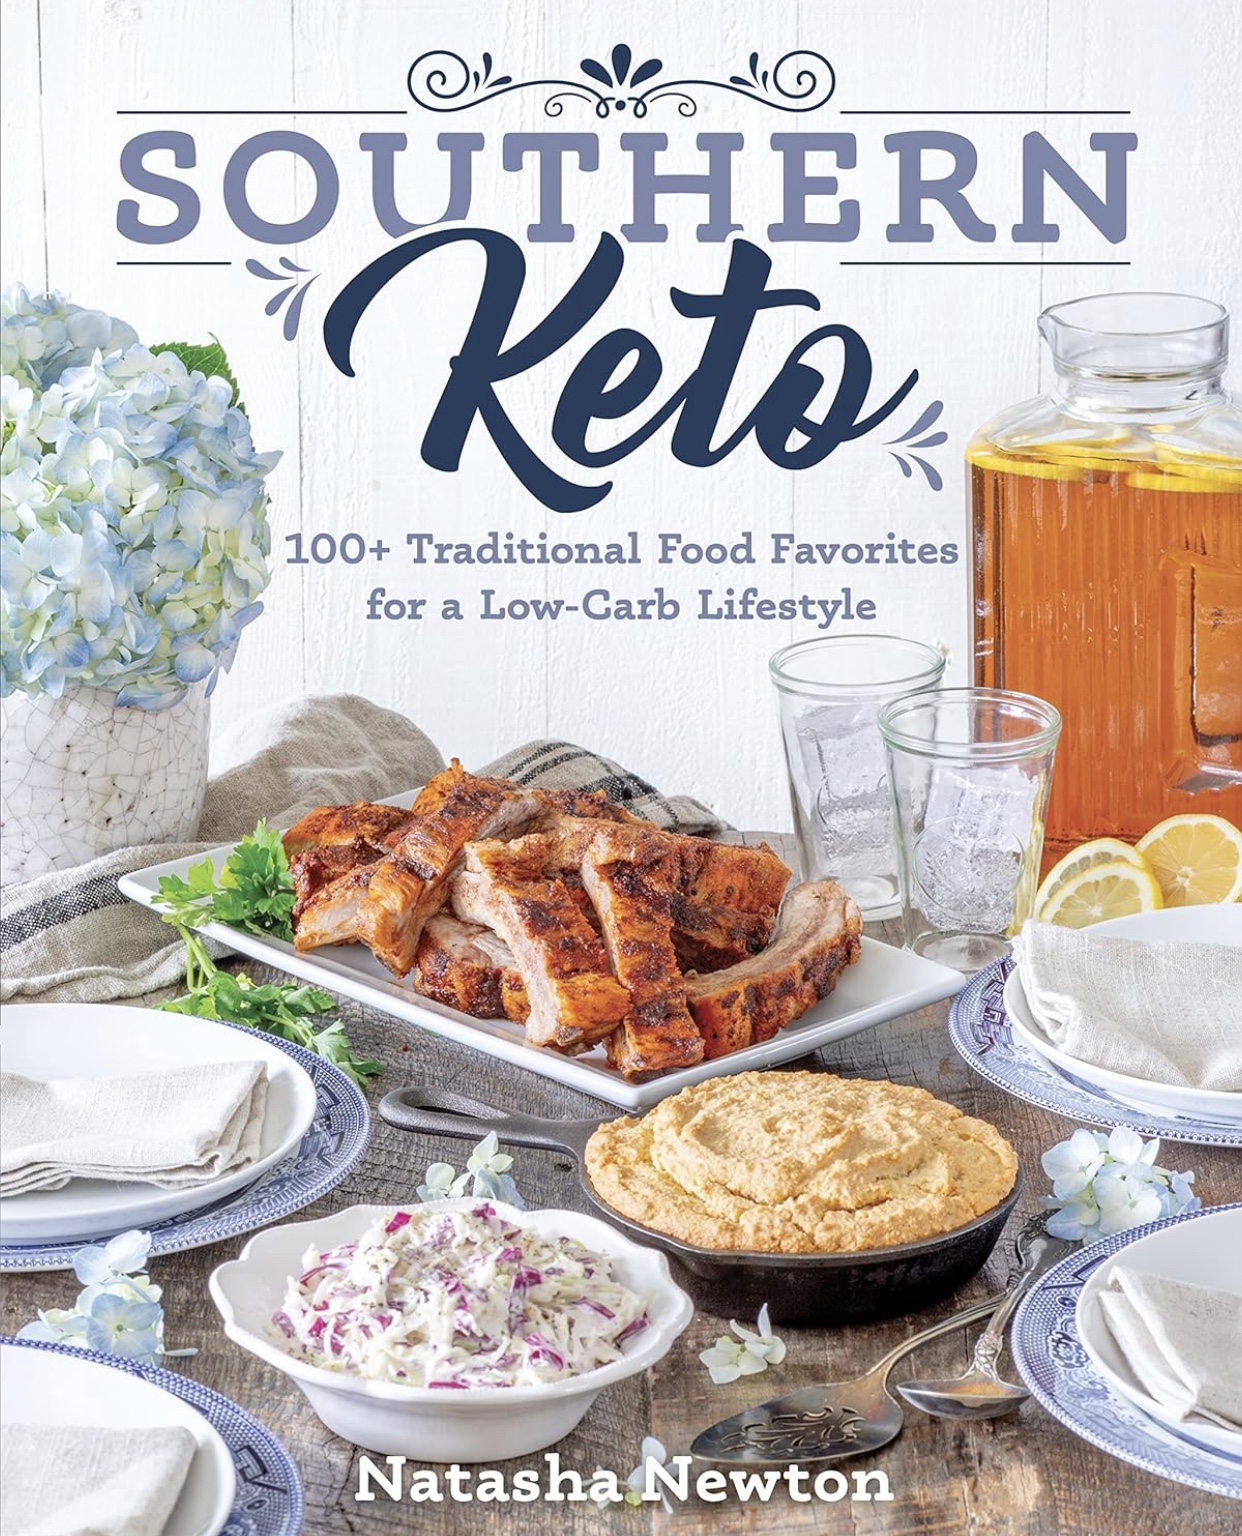 10 Southern Keto Cookbook Recipes You Need in Your Life